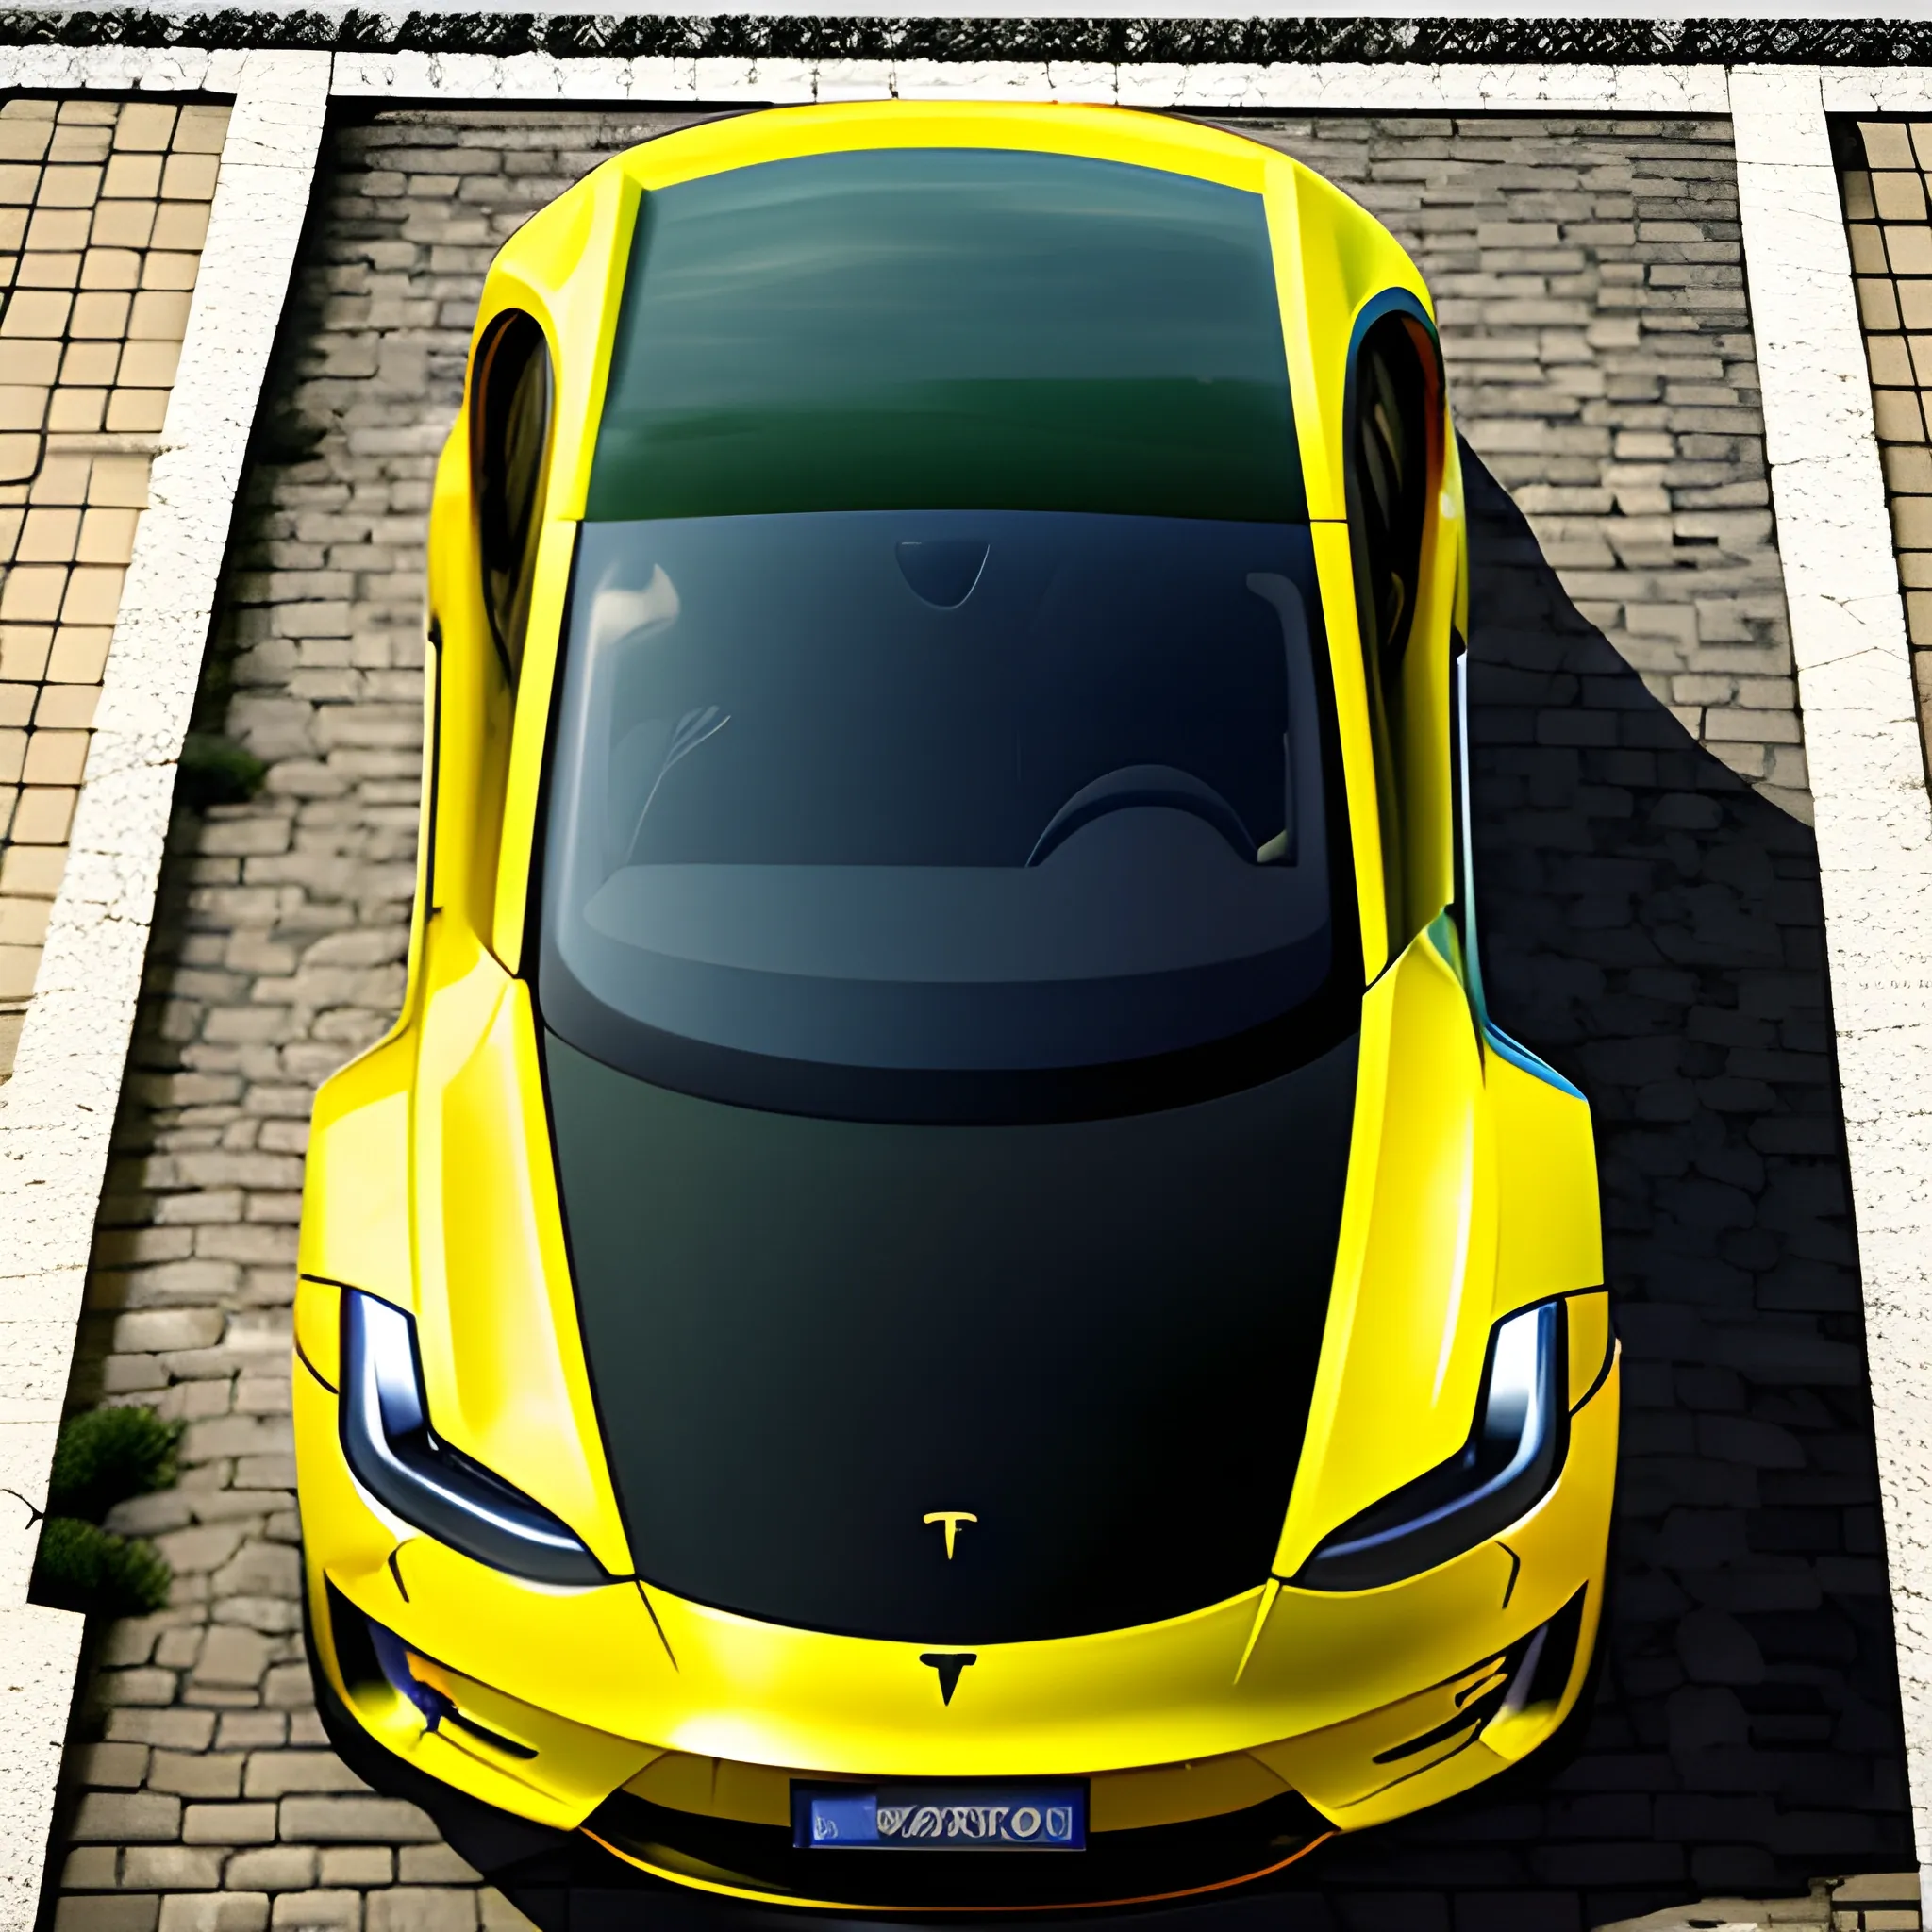 yellow tesla s with green plate wrote TXAA-434 from front view in heroes square budapest
, 3D